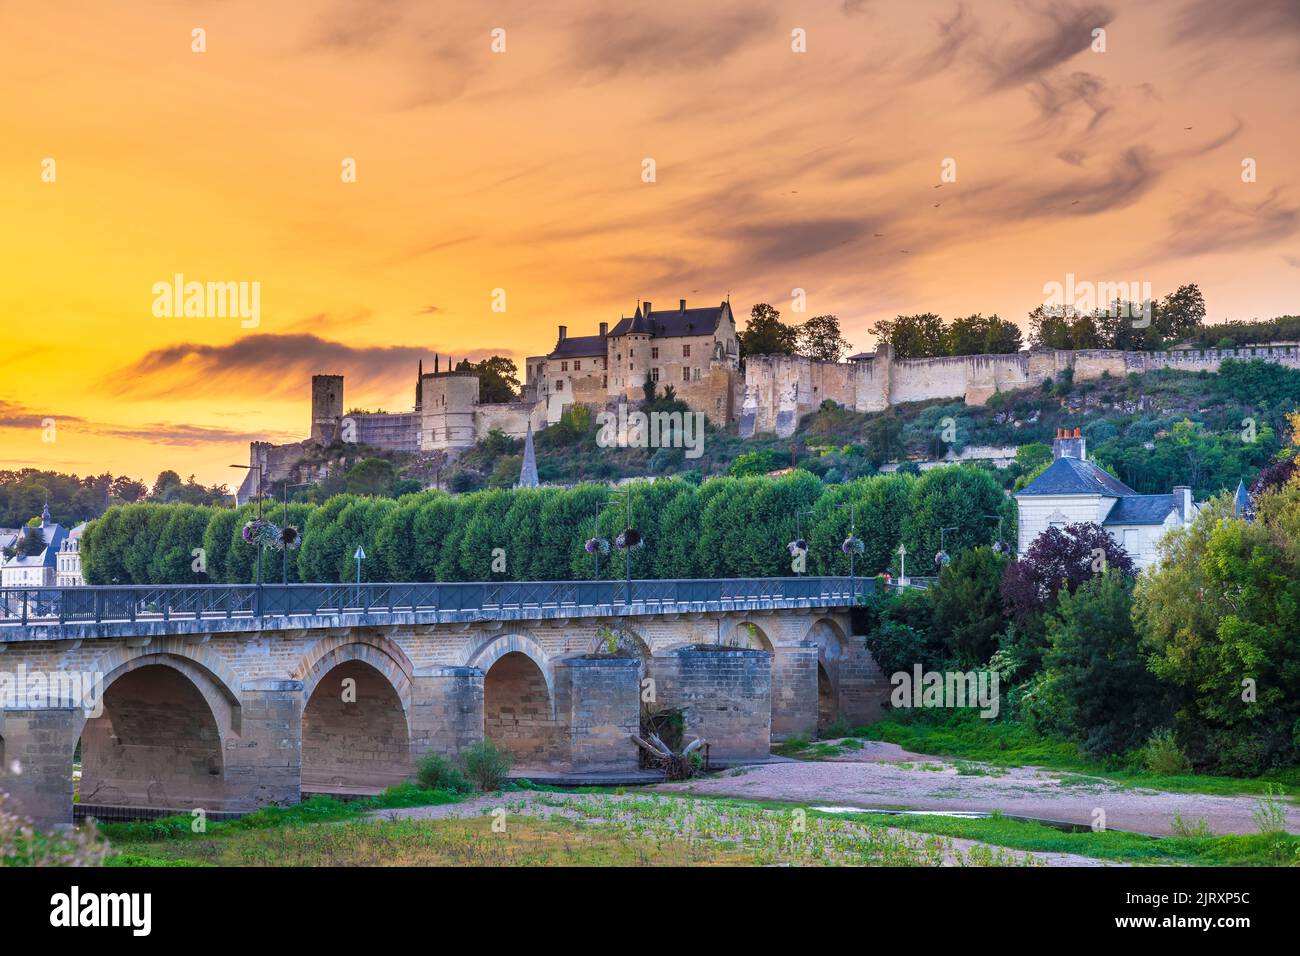 Chinon is located in the heart of the Val de Loire, France. Well known for its wines as well as its castle the Château de Chinon and historic town. Ch Stock Photo